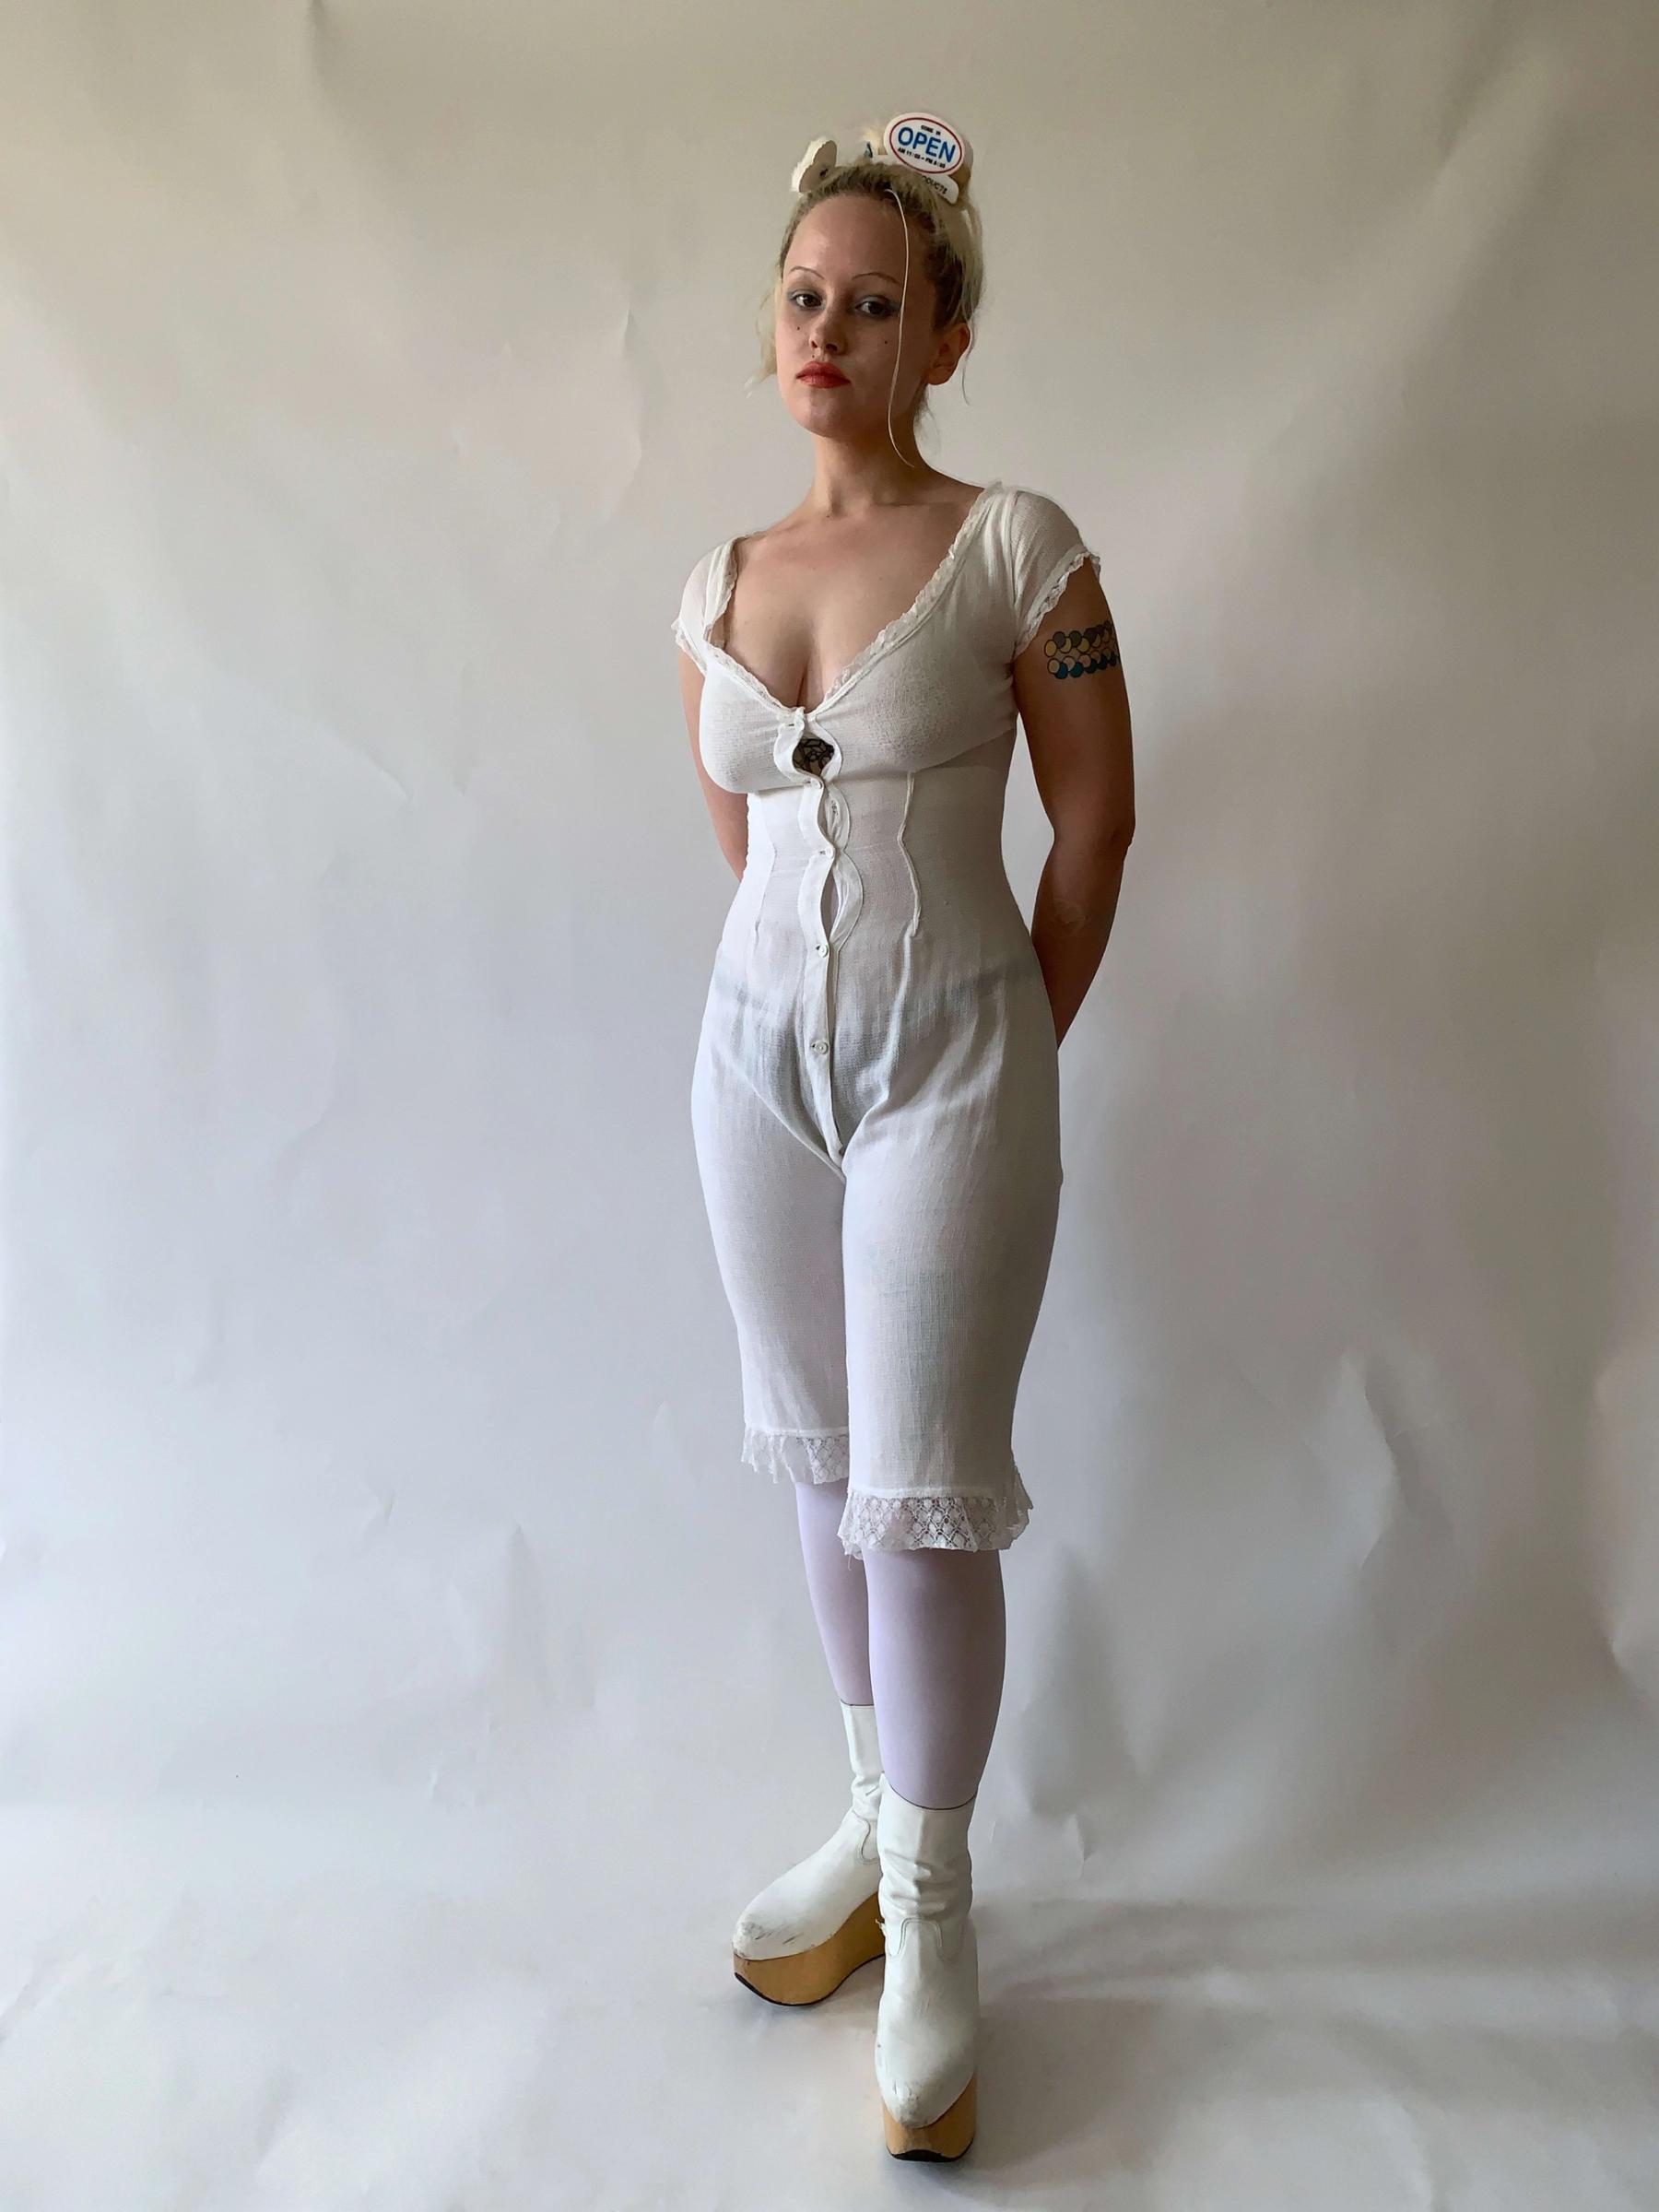 An experiment with Edwardian underwear - making combinations 